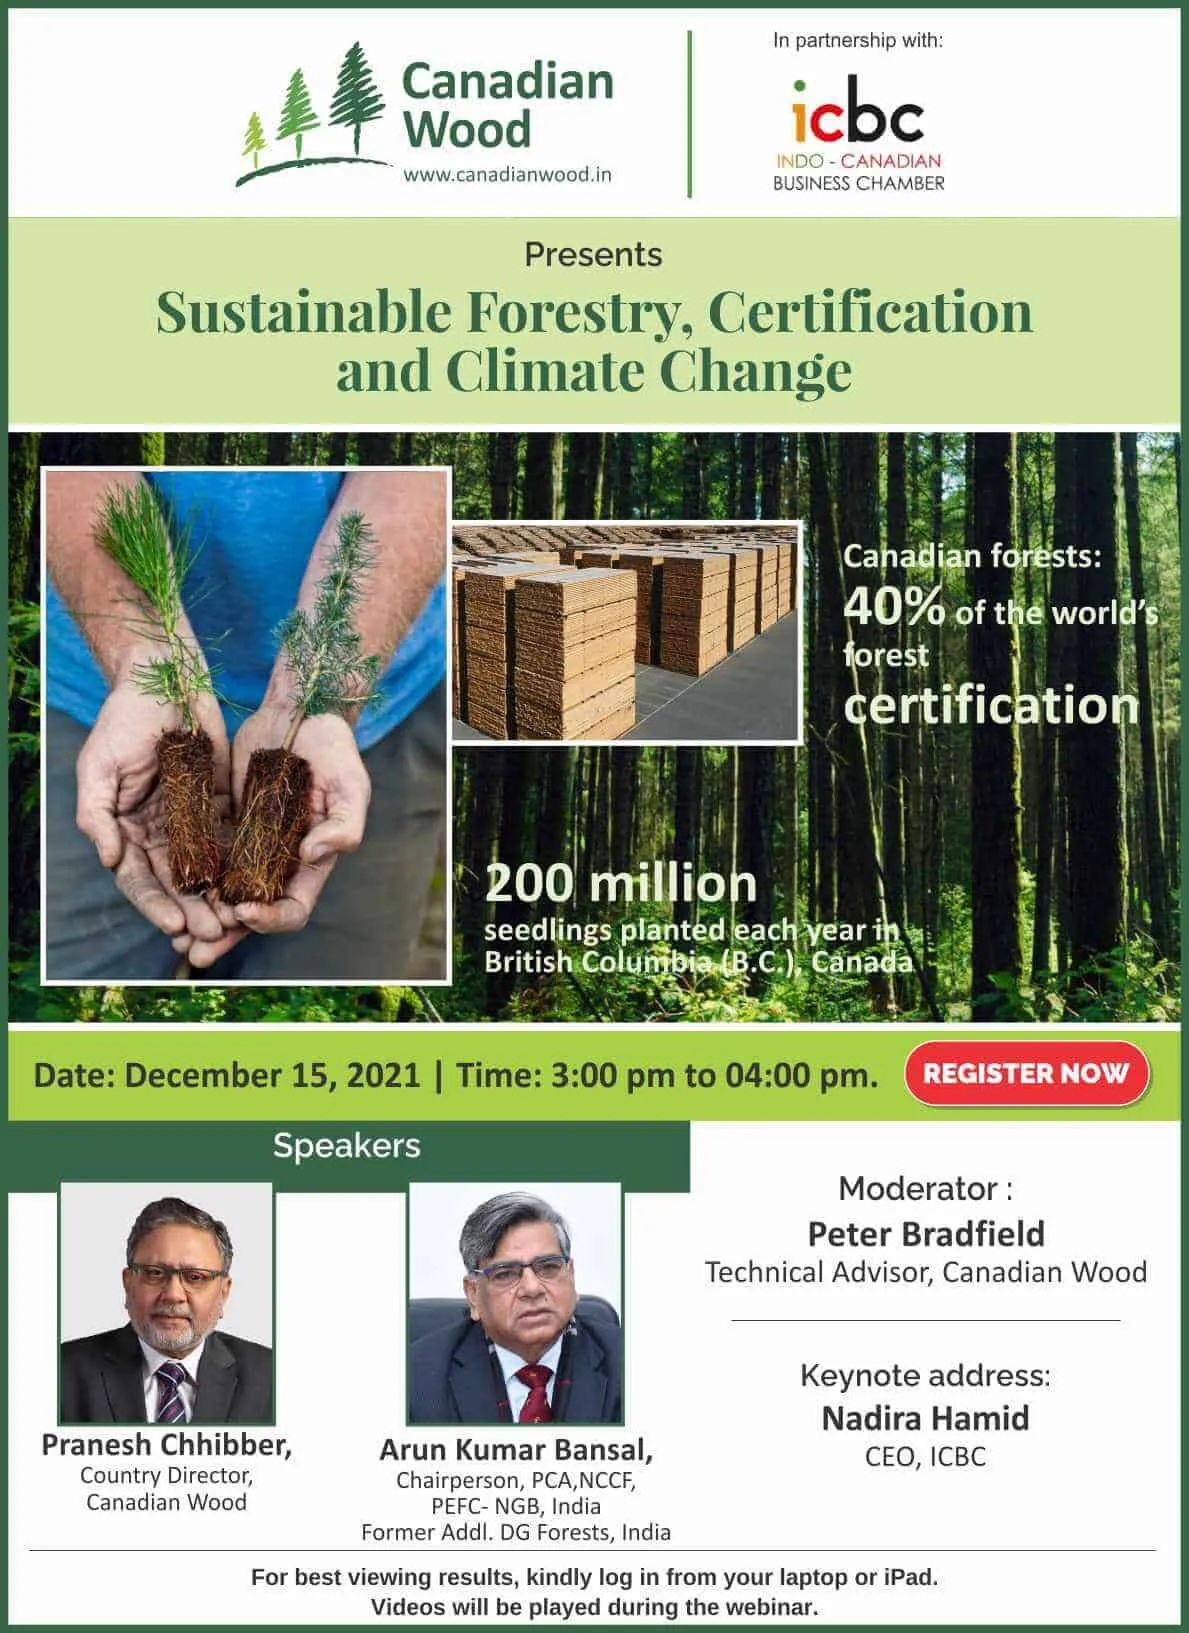 Canadian wood webinar on Sustainable Forestry, Certifications, and Climate Change and sustainable forest management